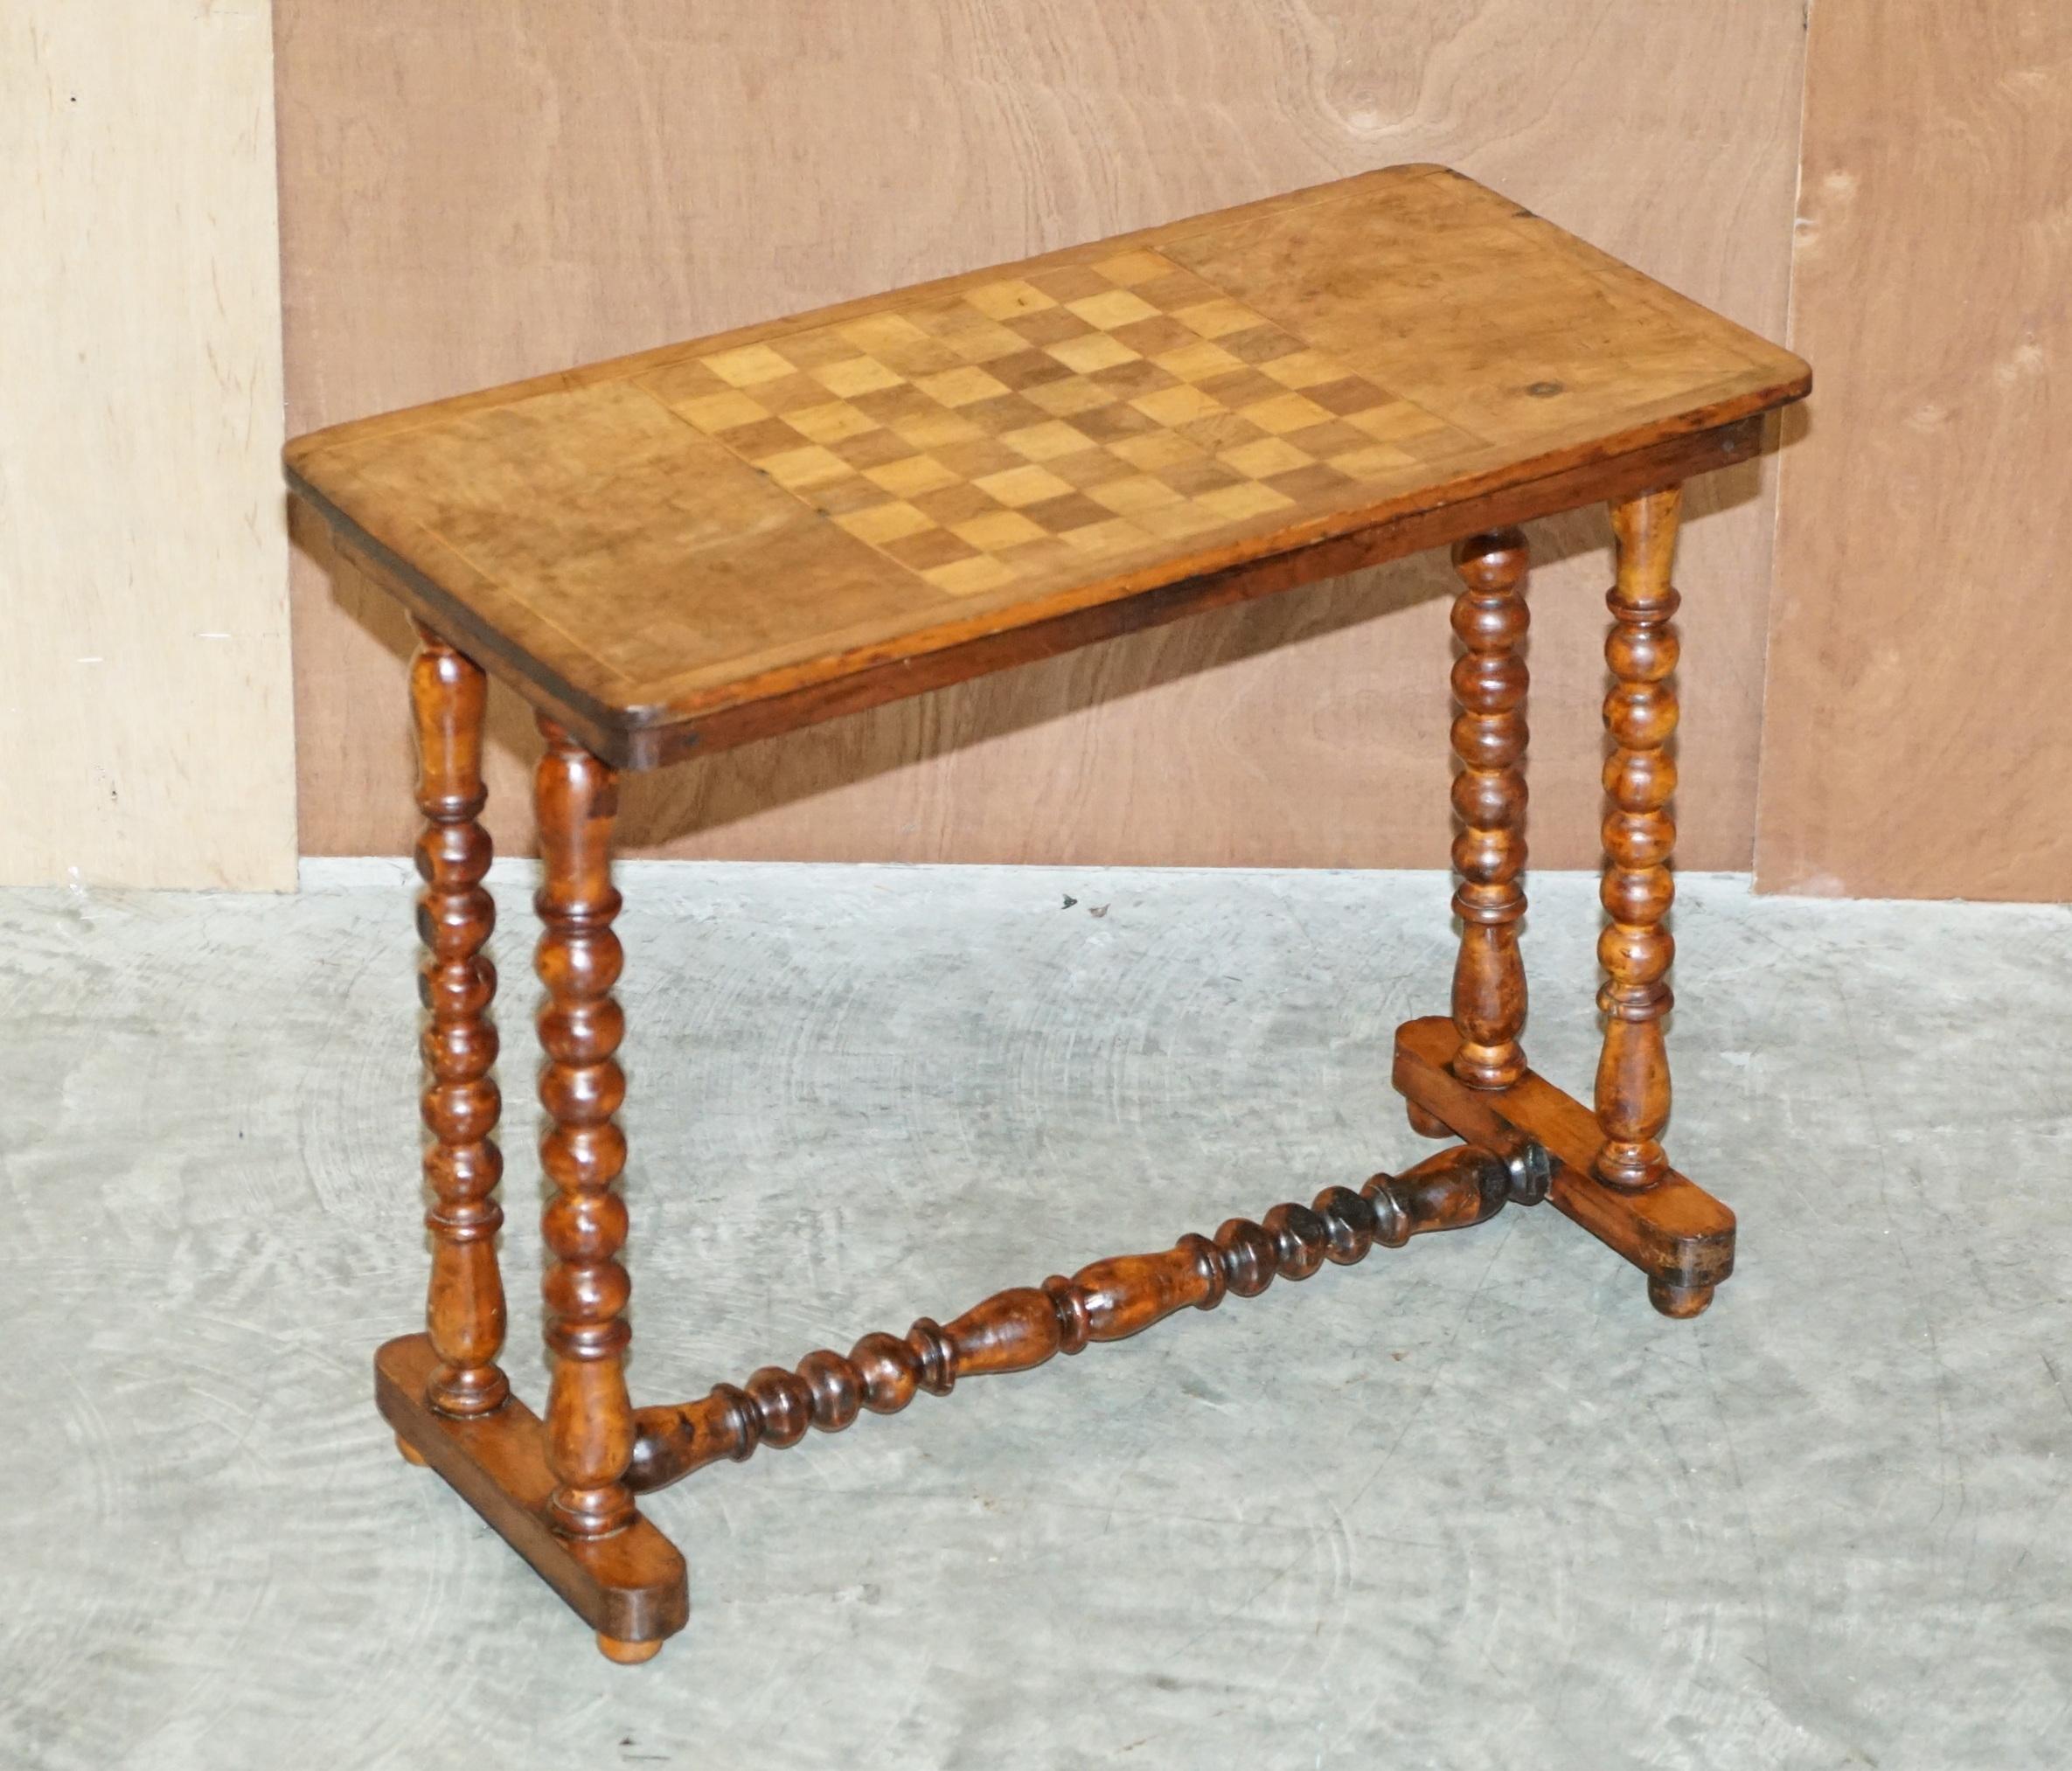 We are delighted to offer this original Victorian circa 1860-1880 burr walnut chess games table with Bobbin turned base 

A very good looking and well made table, it can be used as an occasional table or for chess as intended, the materials used